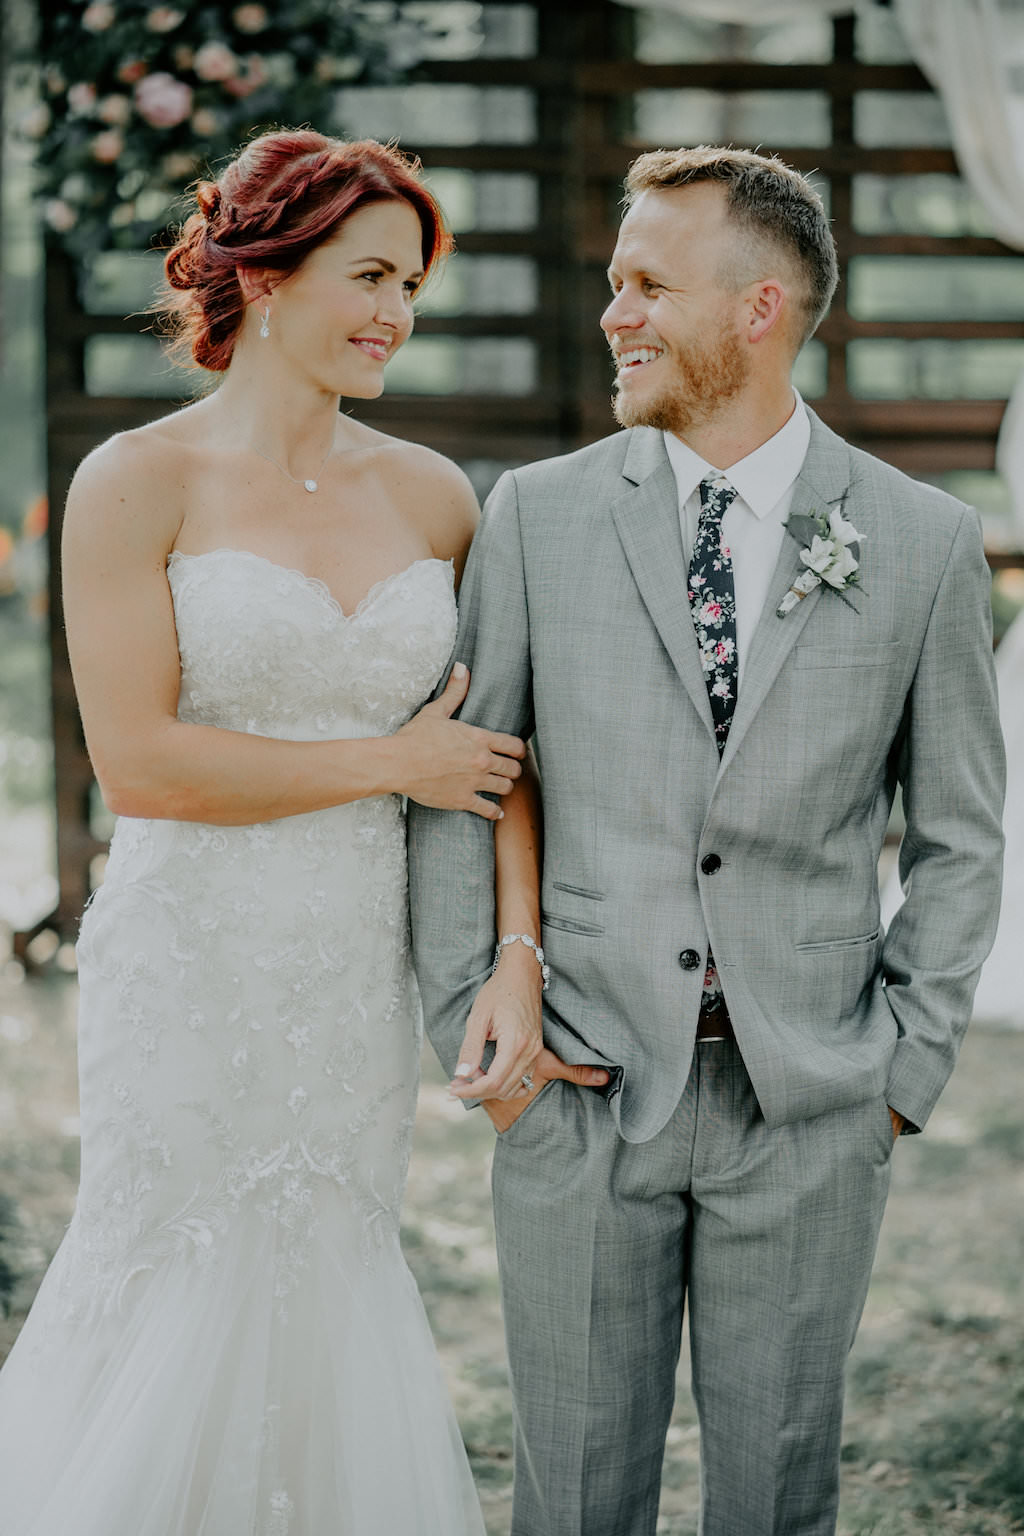 Rustic Farm Wedding Portrait with Gray Suit, Floral TIe and White Boutonniere